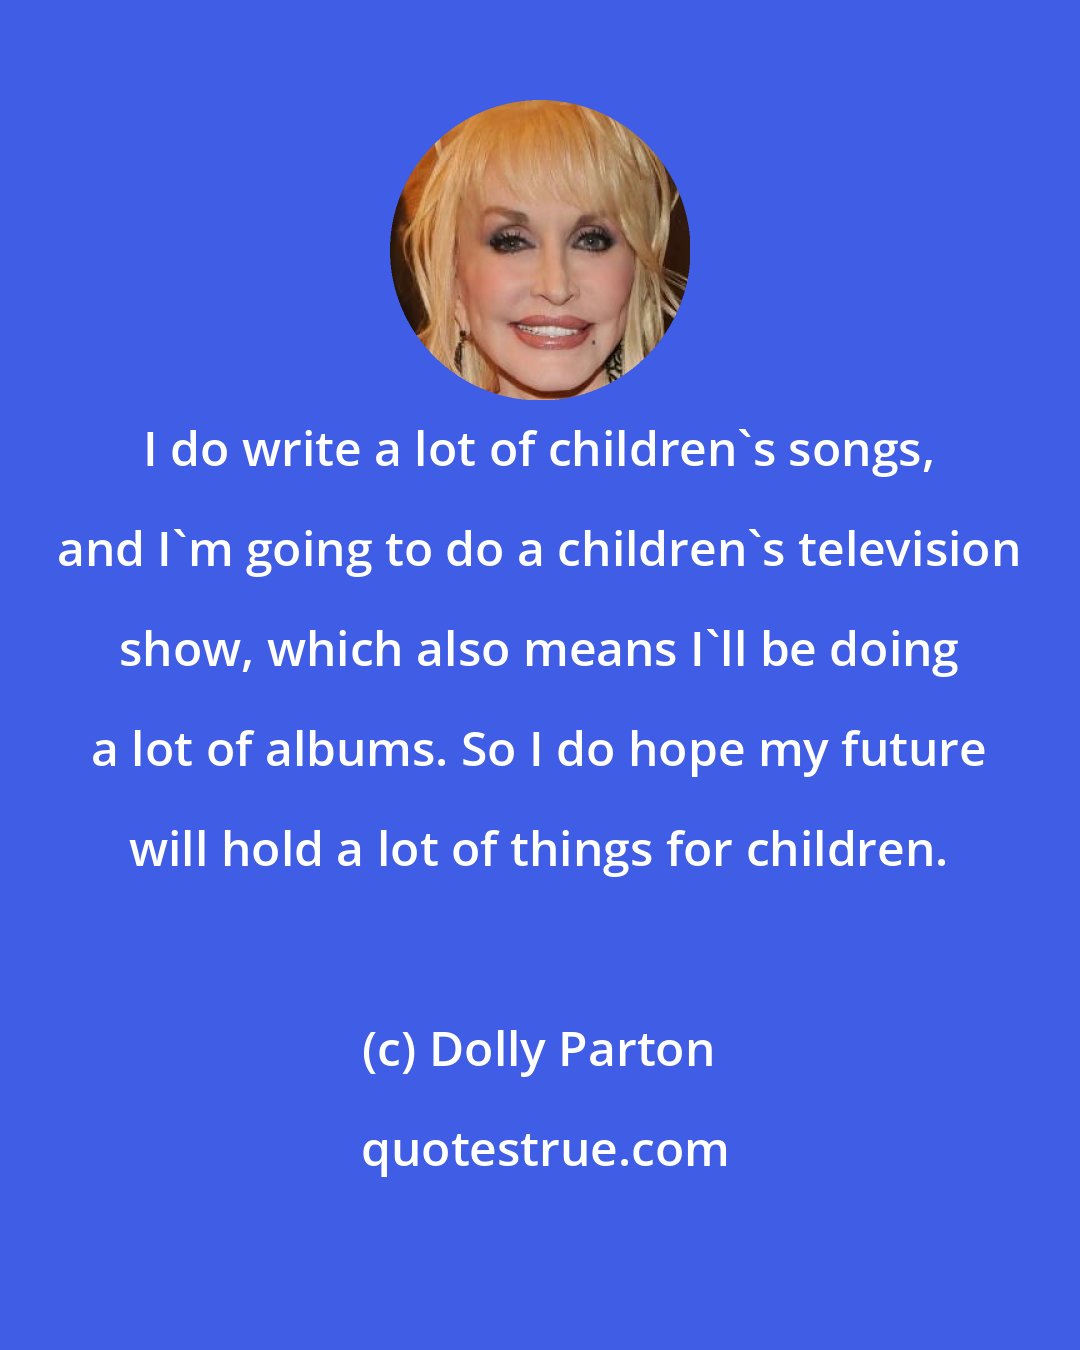 Dolly Parton: I do write a lot of children's songs, and I'm going to do a children's television show, which also means I'll be doing a lot of albums. So I do hope my future will hold a lot of things for children.